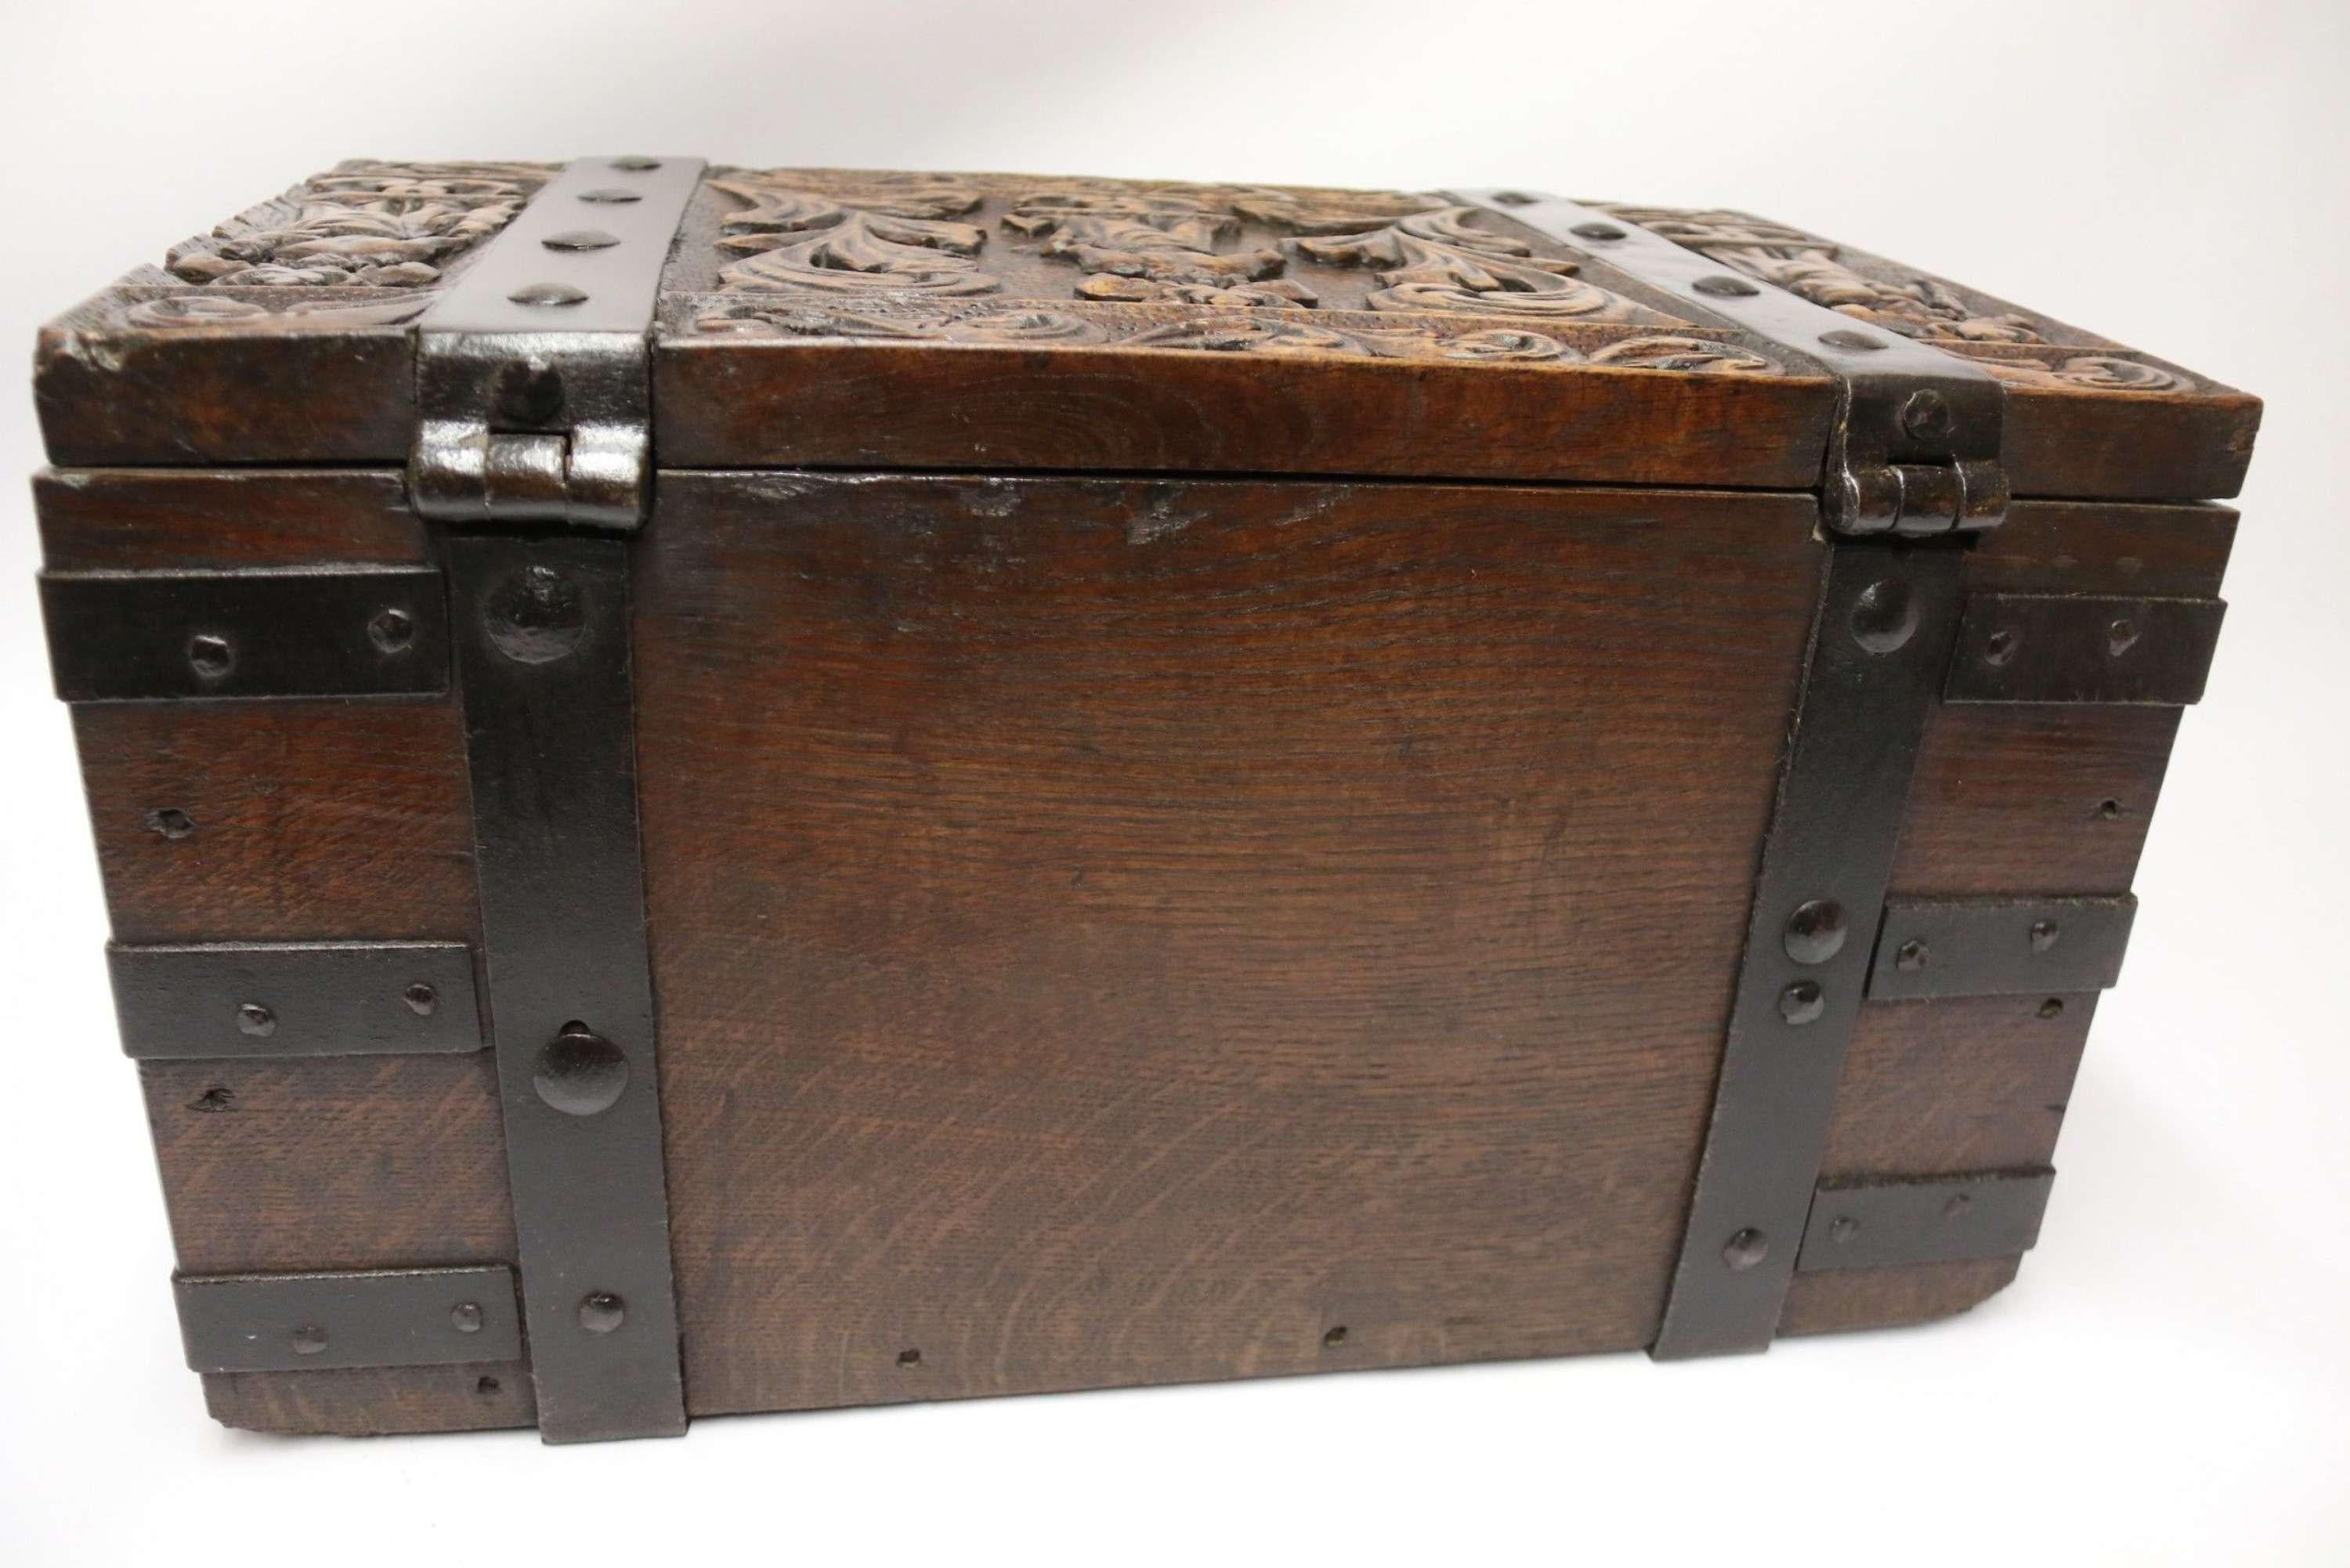 A Rare Ships or Country House Carved Oak and Steel Bound Strong Box

This fabulous and richly carved oak strong box most likely belonged to a 19th century ship’s captain and was used for storing money and valuables. It is of a smaller size than the